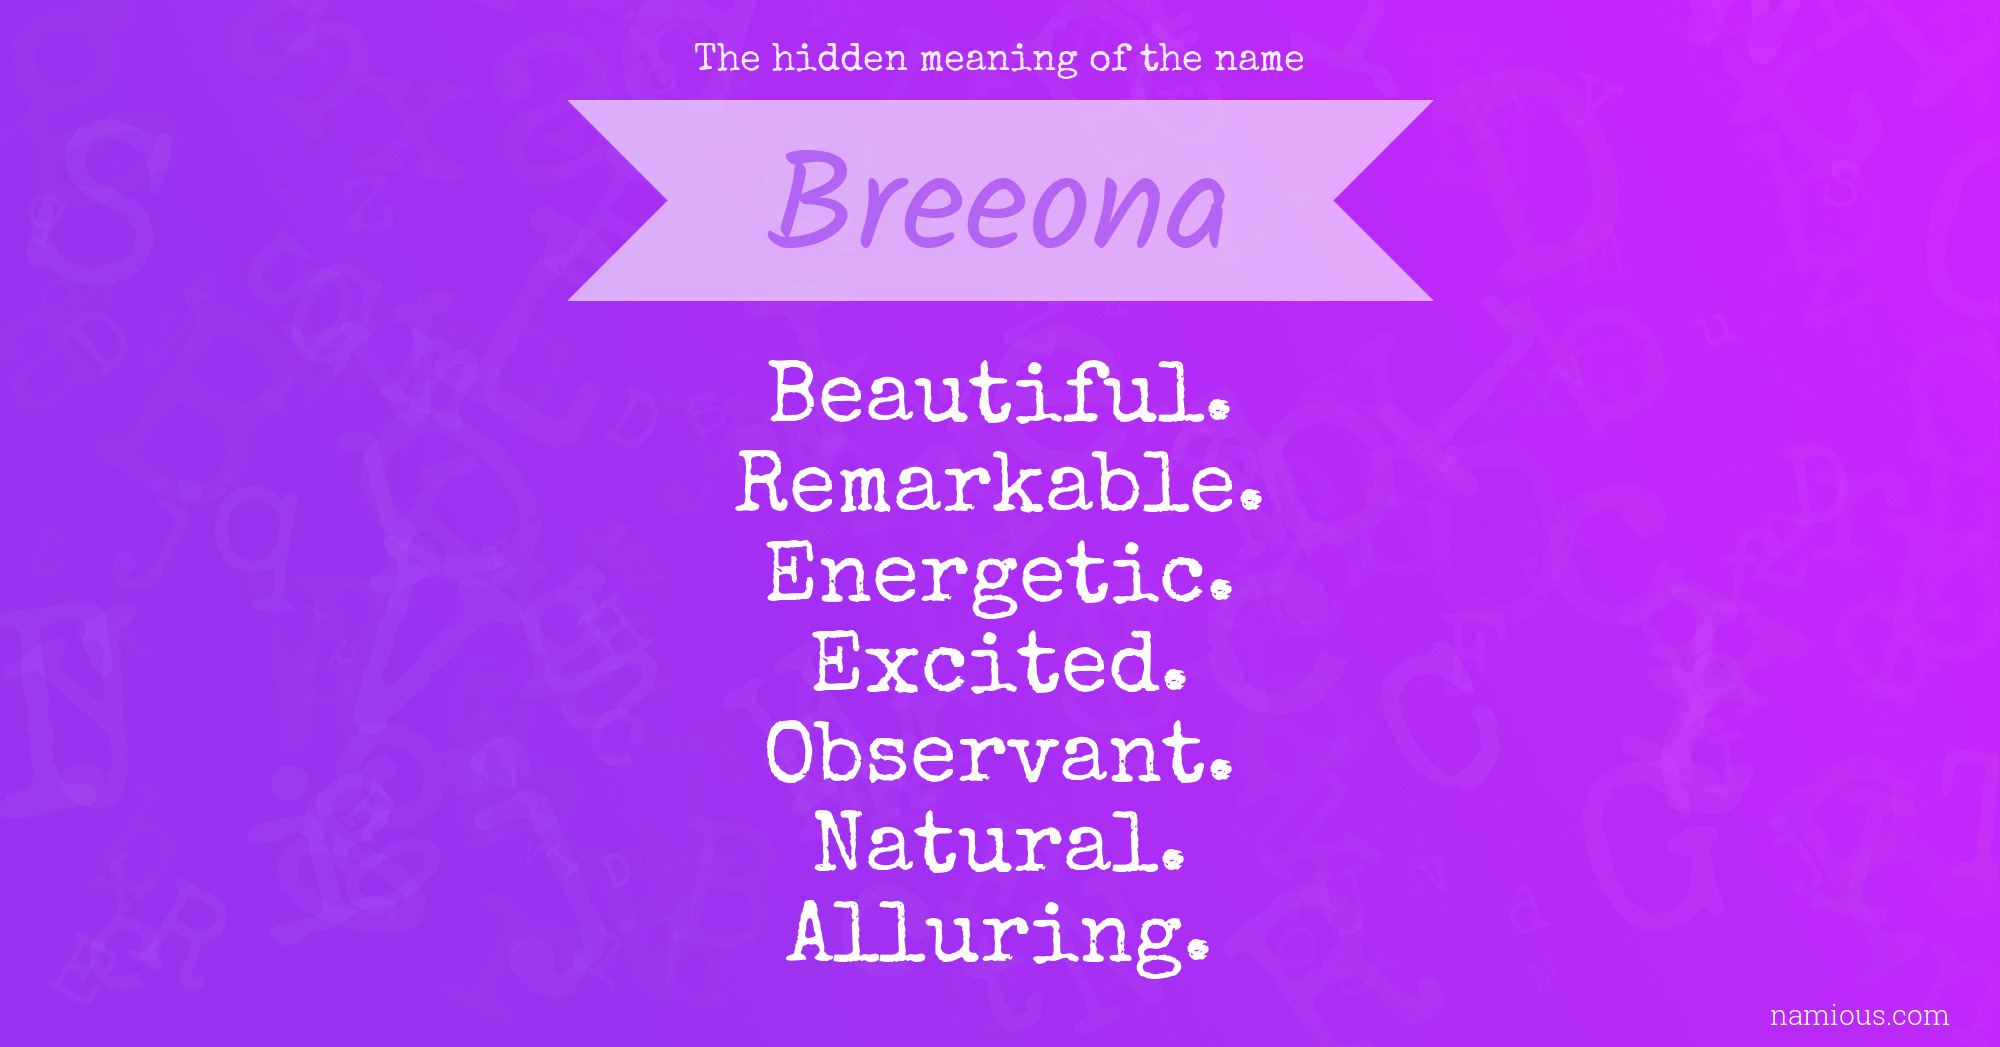 The hidden meaning of the name Breeona